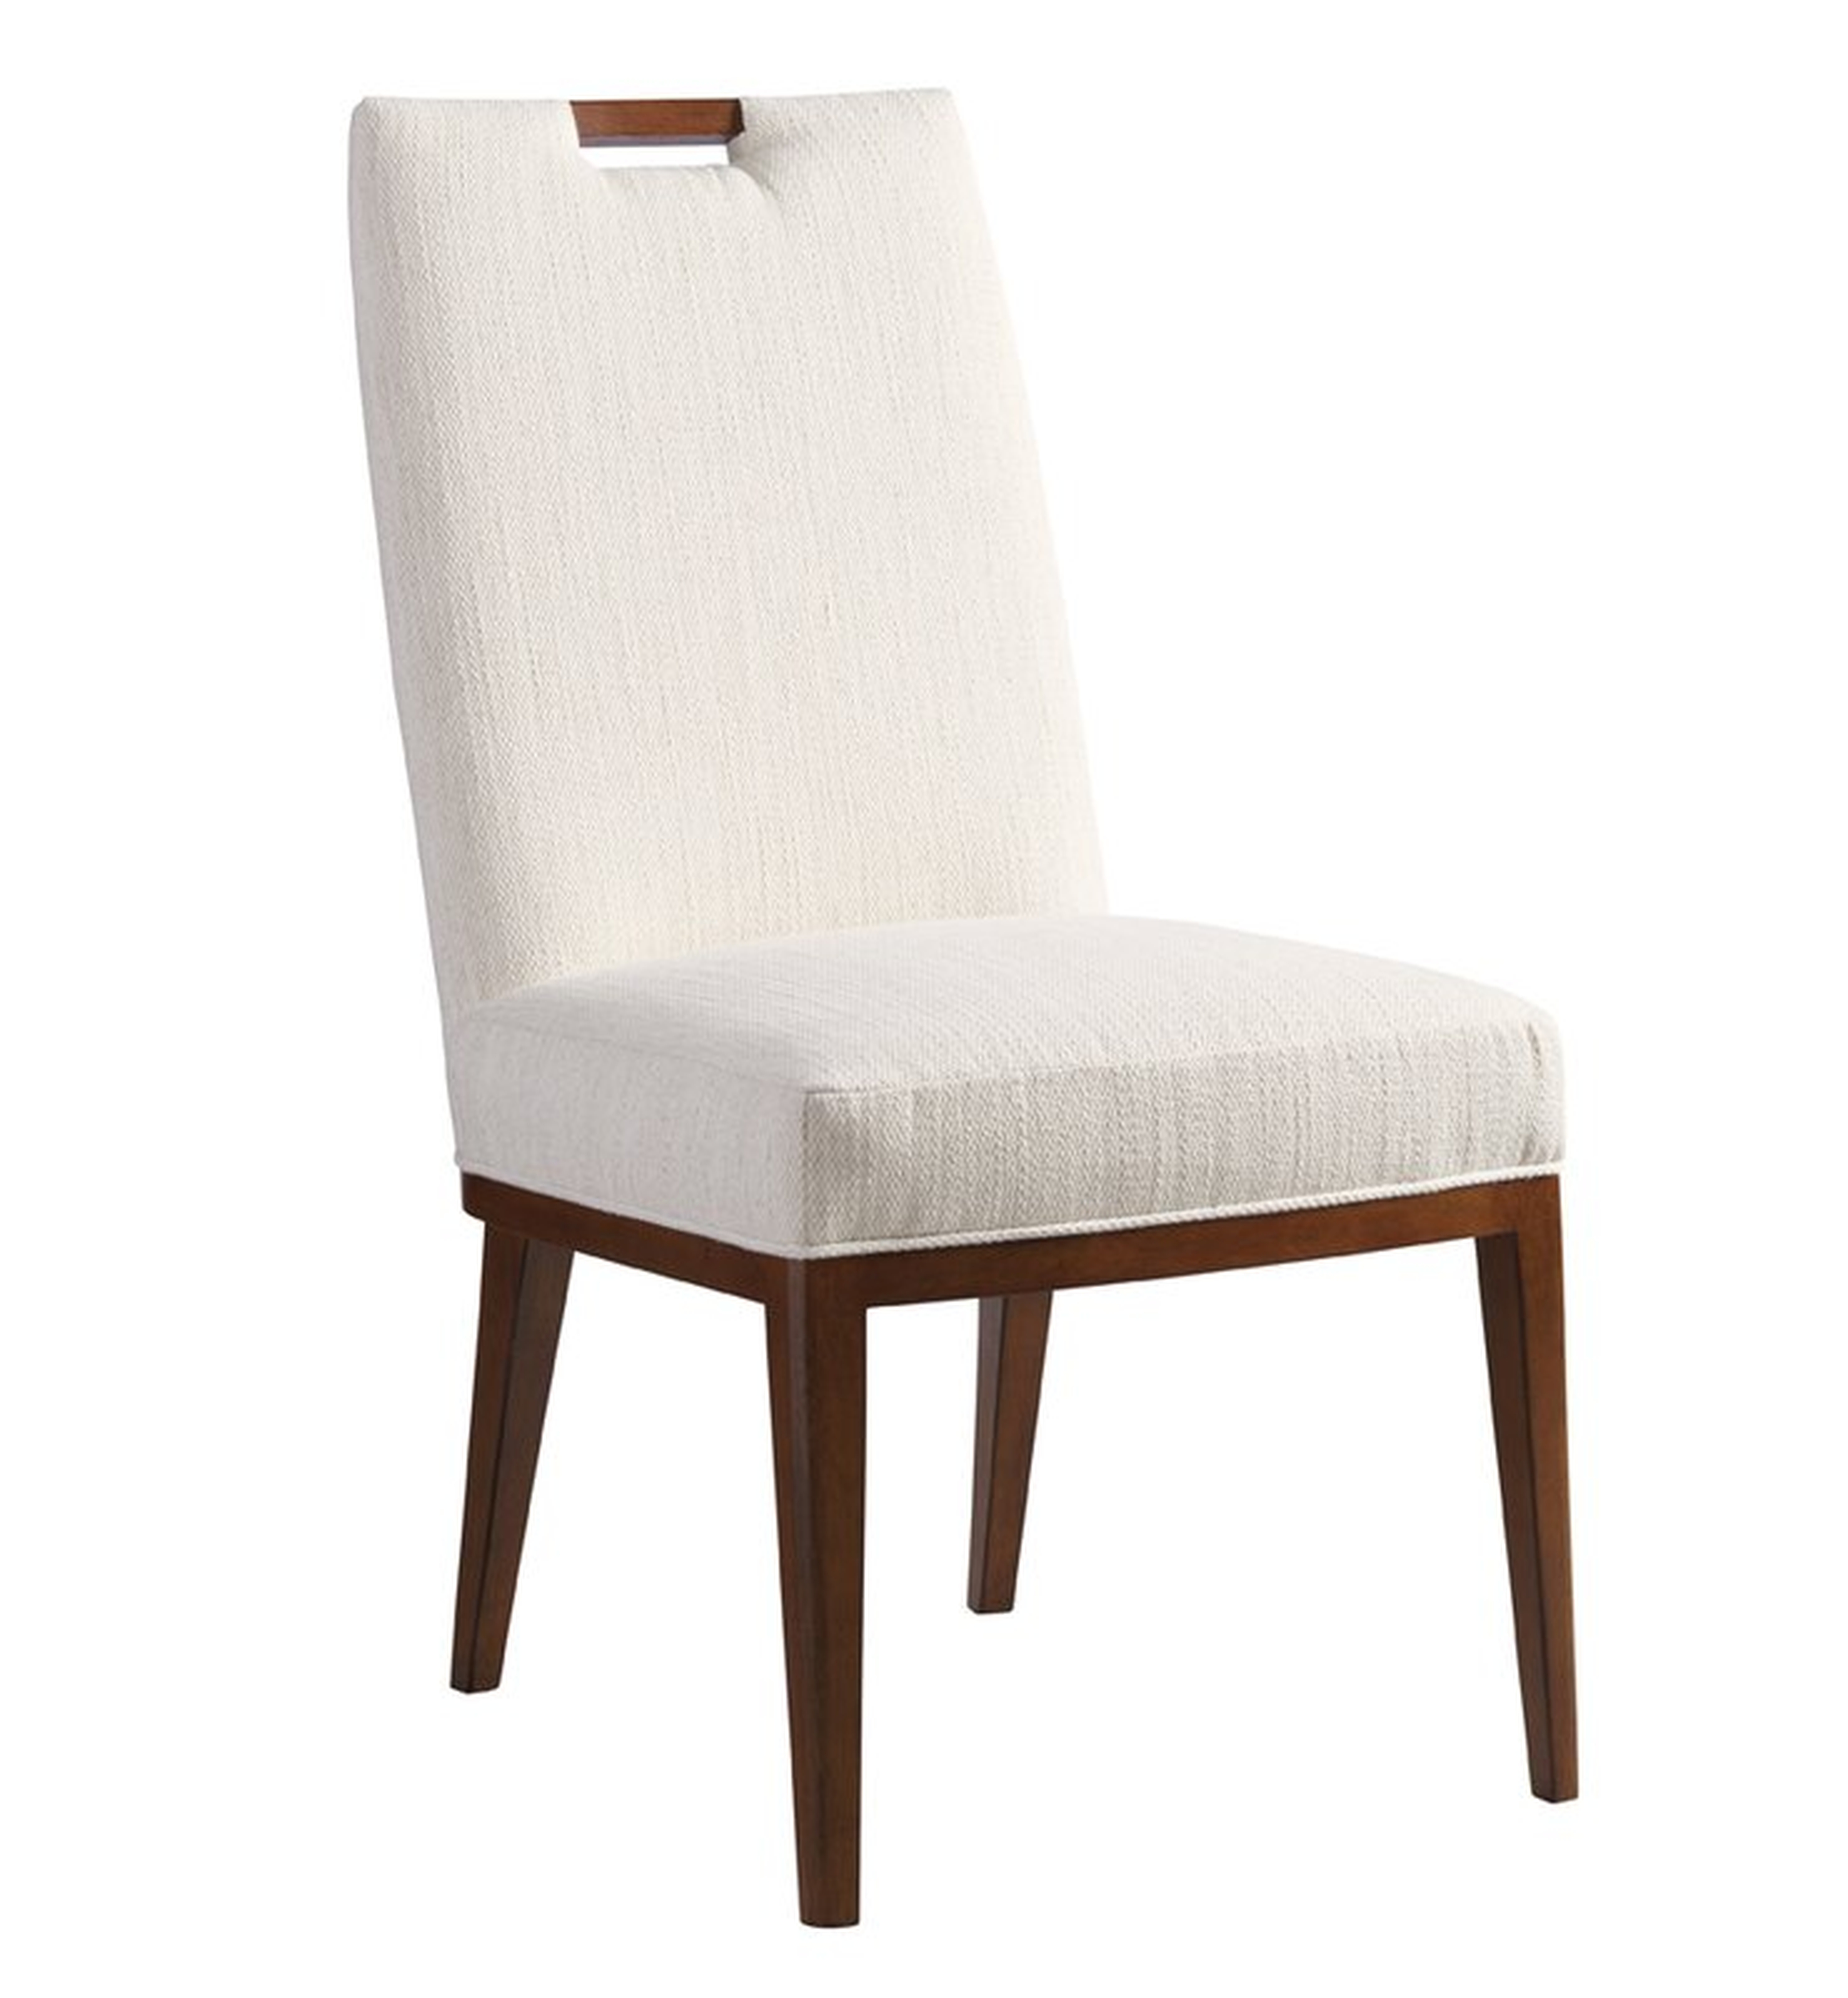 Tommy Bahama Home Island Fusion Coles Bay Upholstered Dining Chair Upholstery Color: White - Perigold